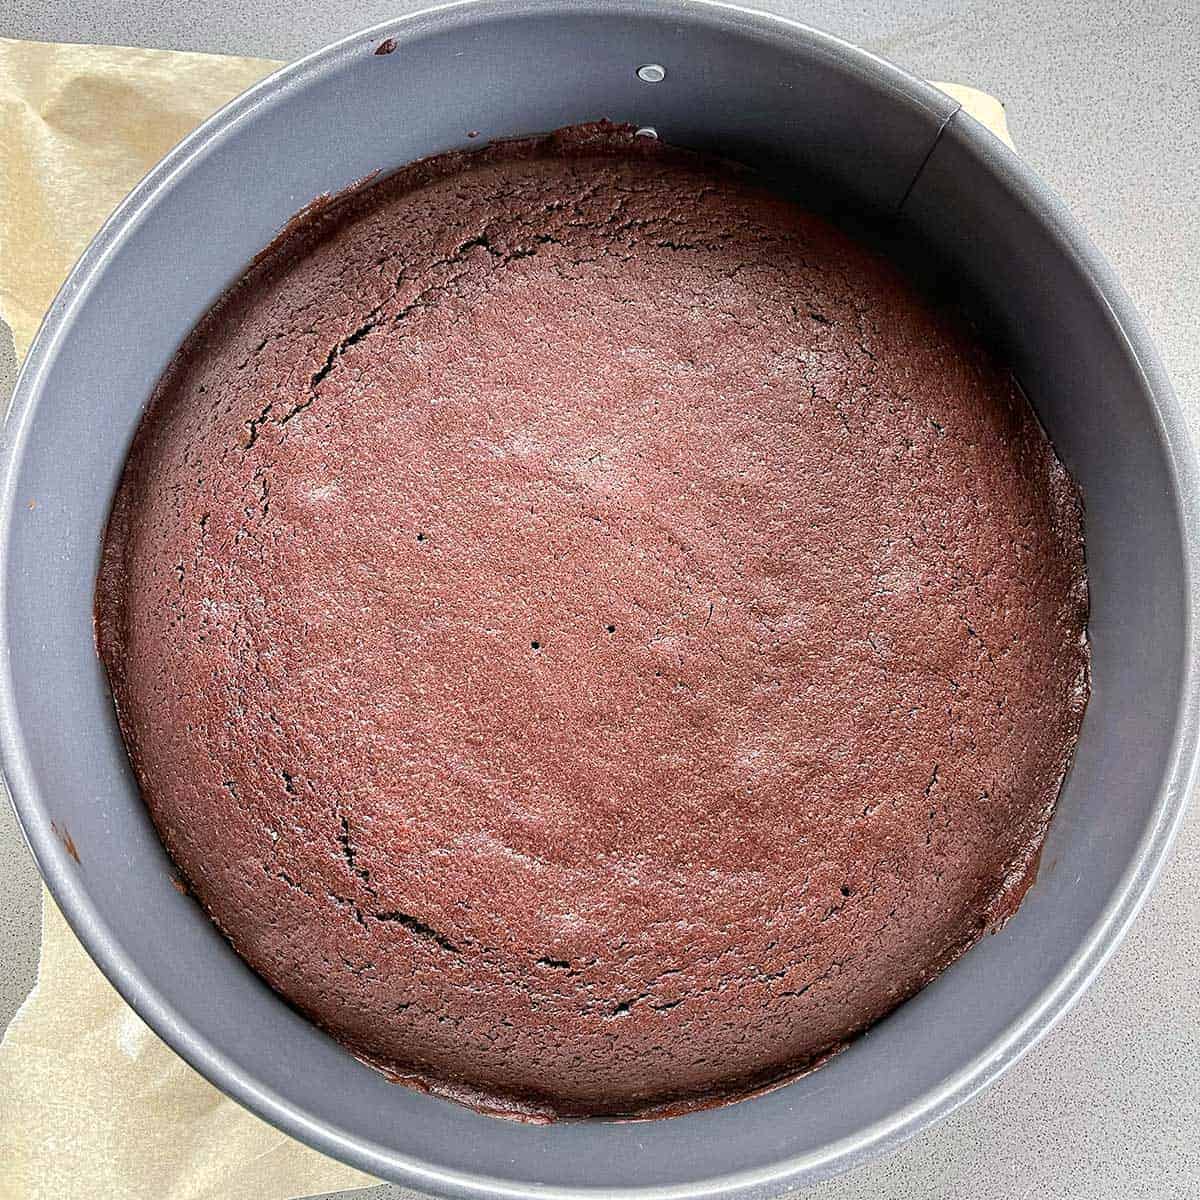 A cooked chocolate cake in a round cake tin.